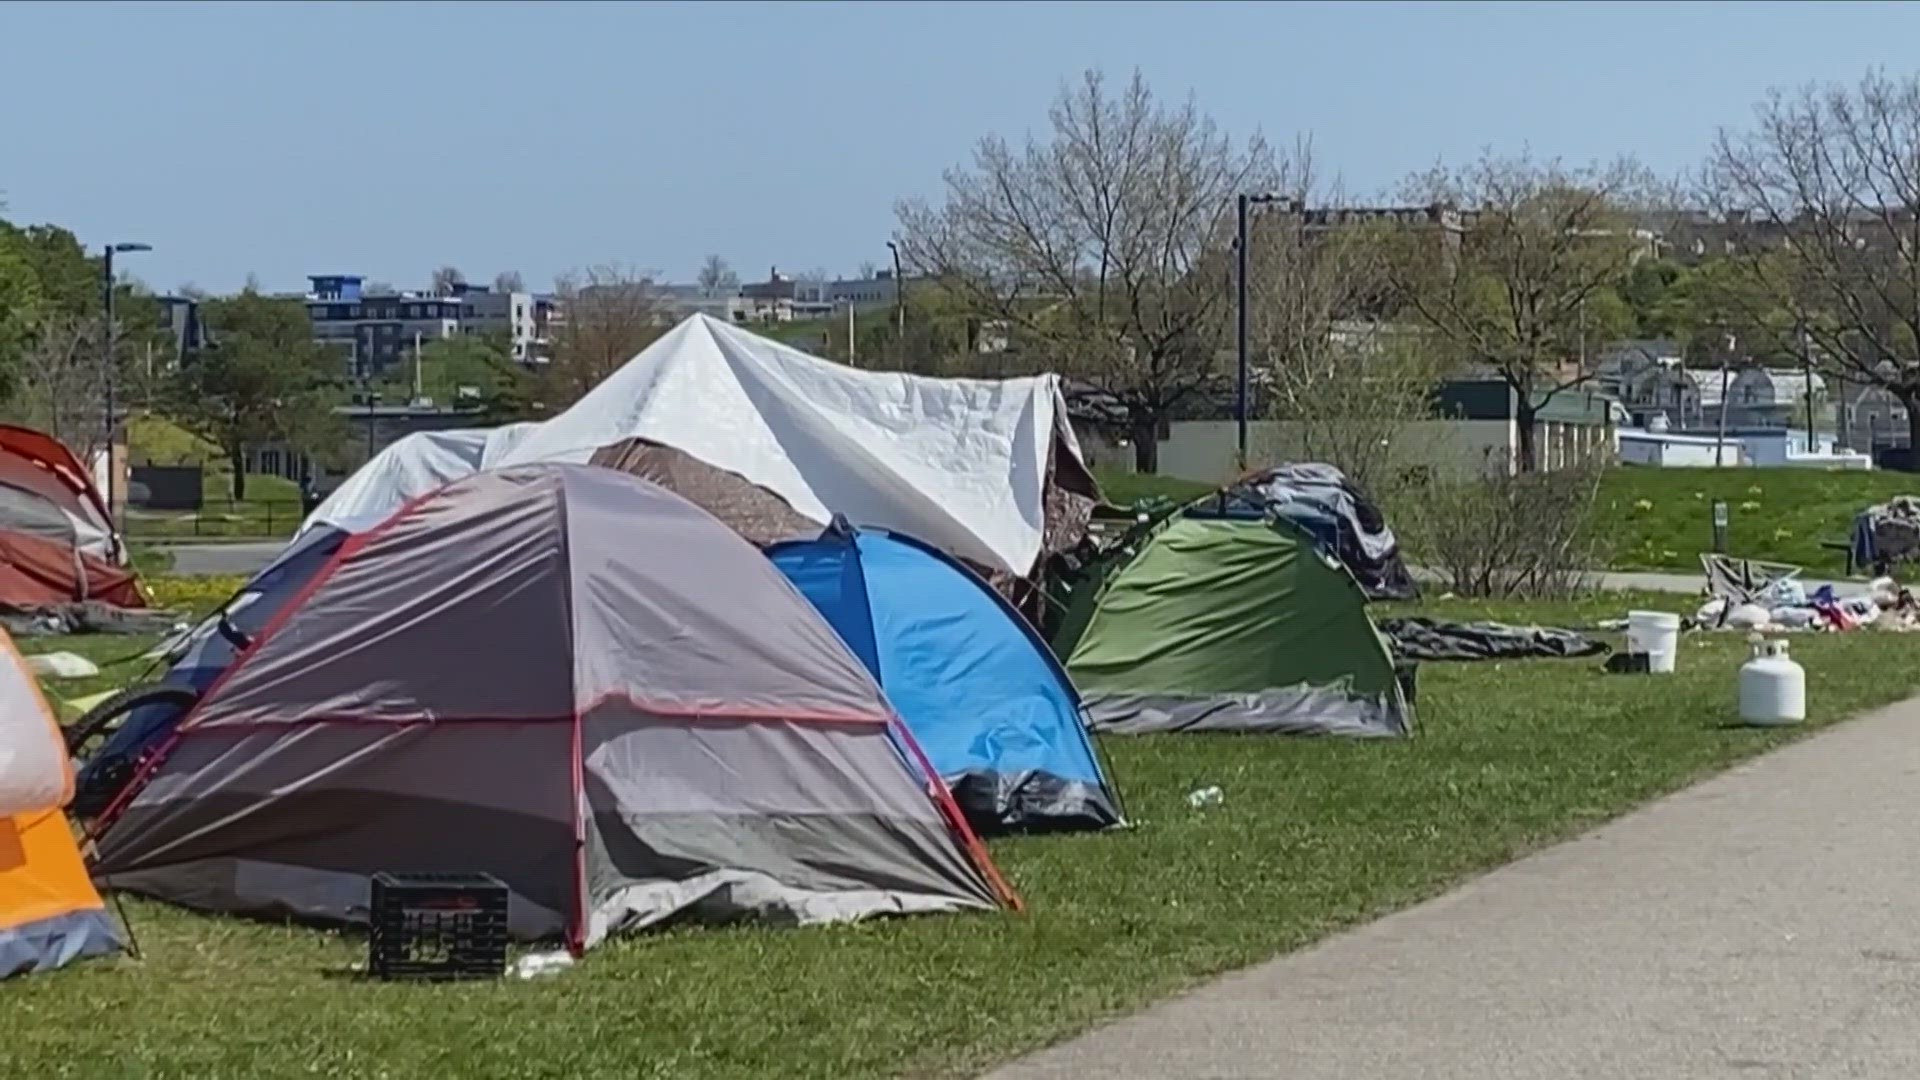 Councilors voted Tuesday to clear the encampment, which has grown to more than 80 tents over the past months. Those at the encampment said they have nowhere to go.